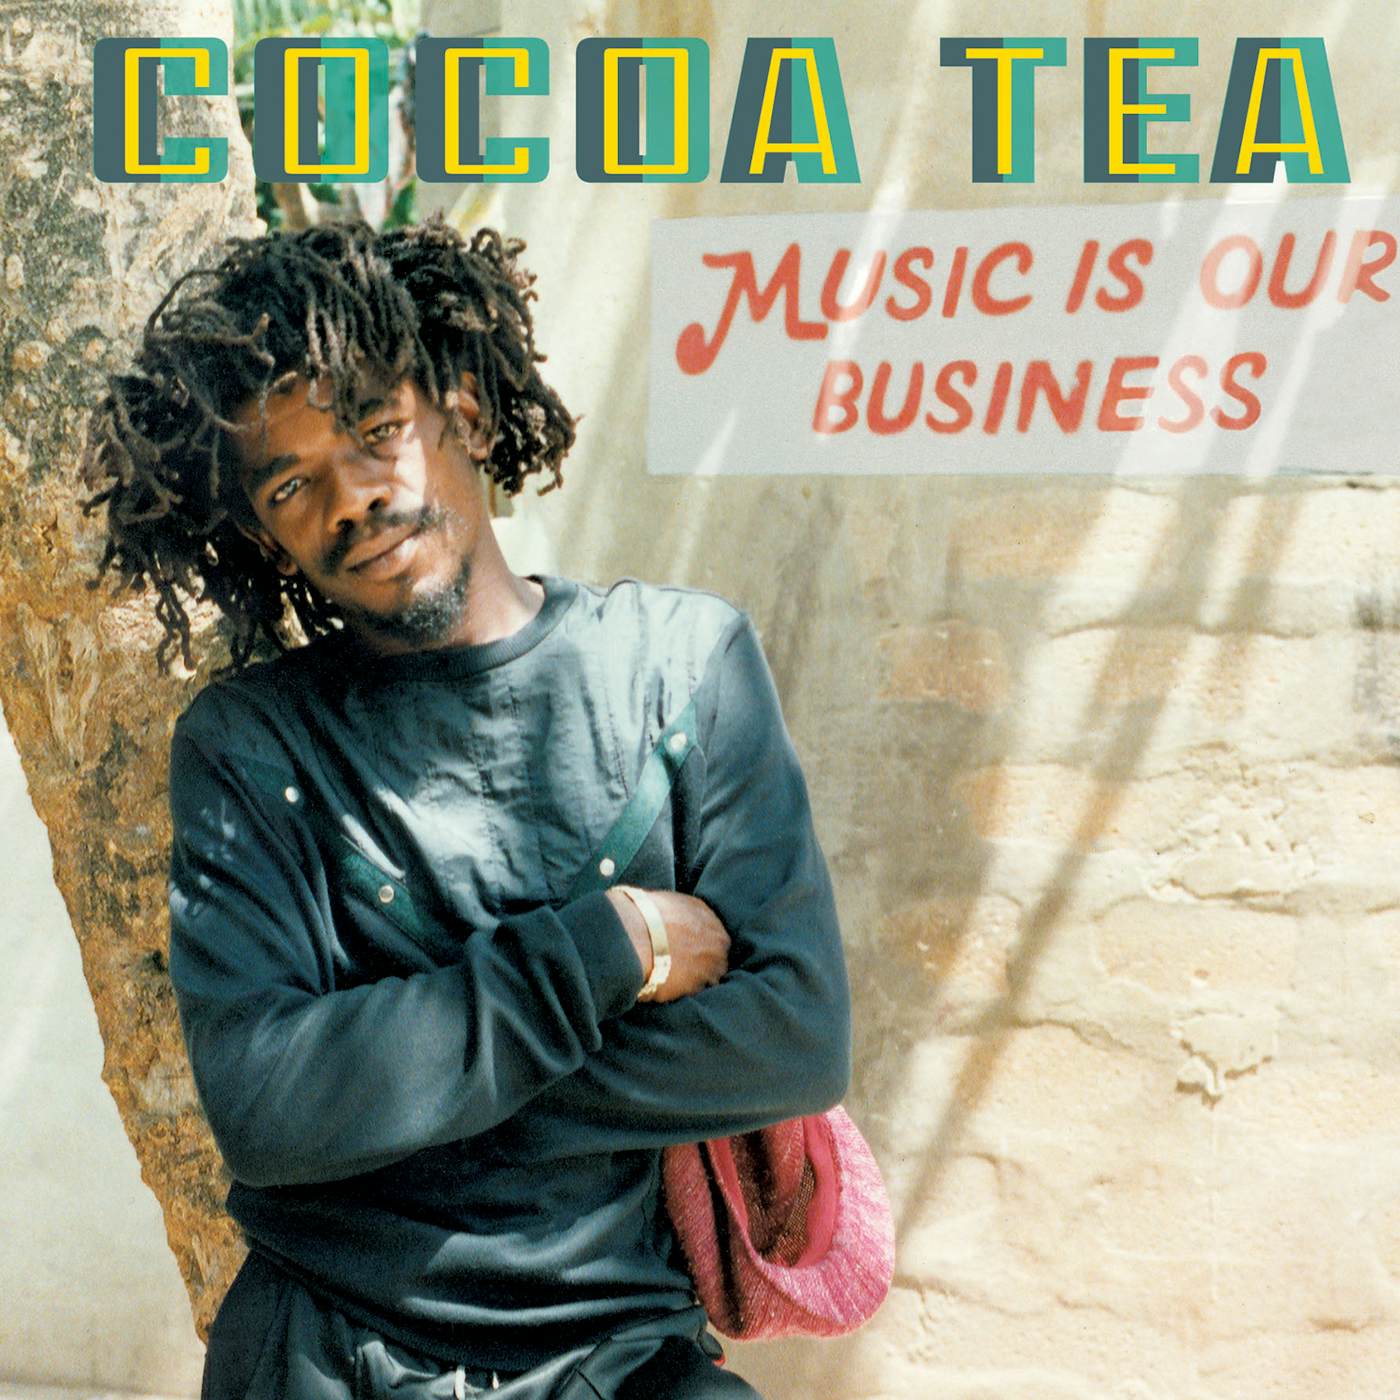 Cocoa Tea Music Is Our Business Vinyl Record